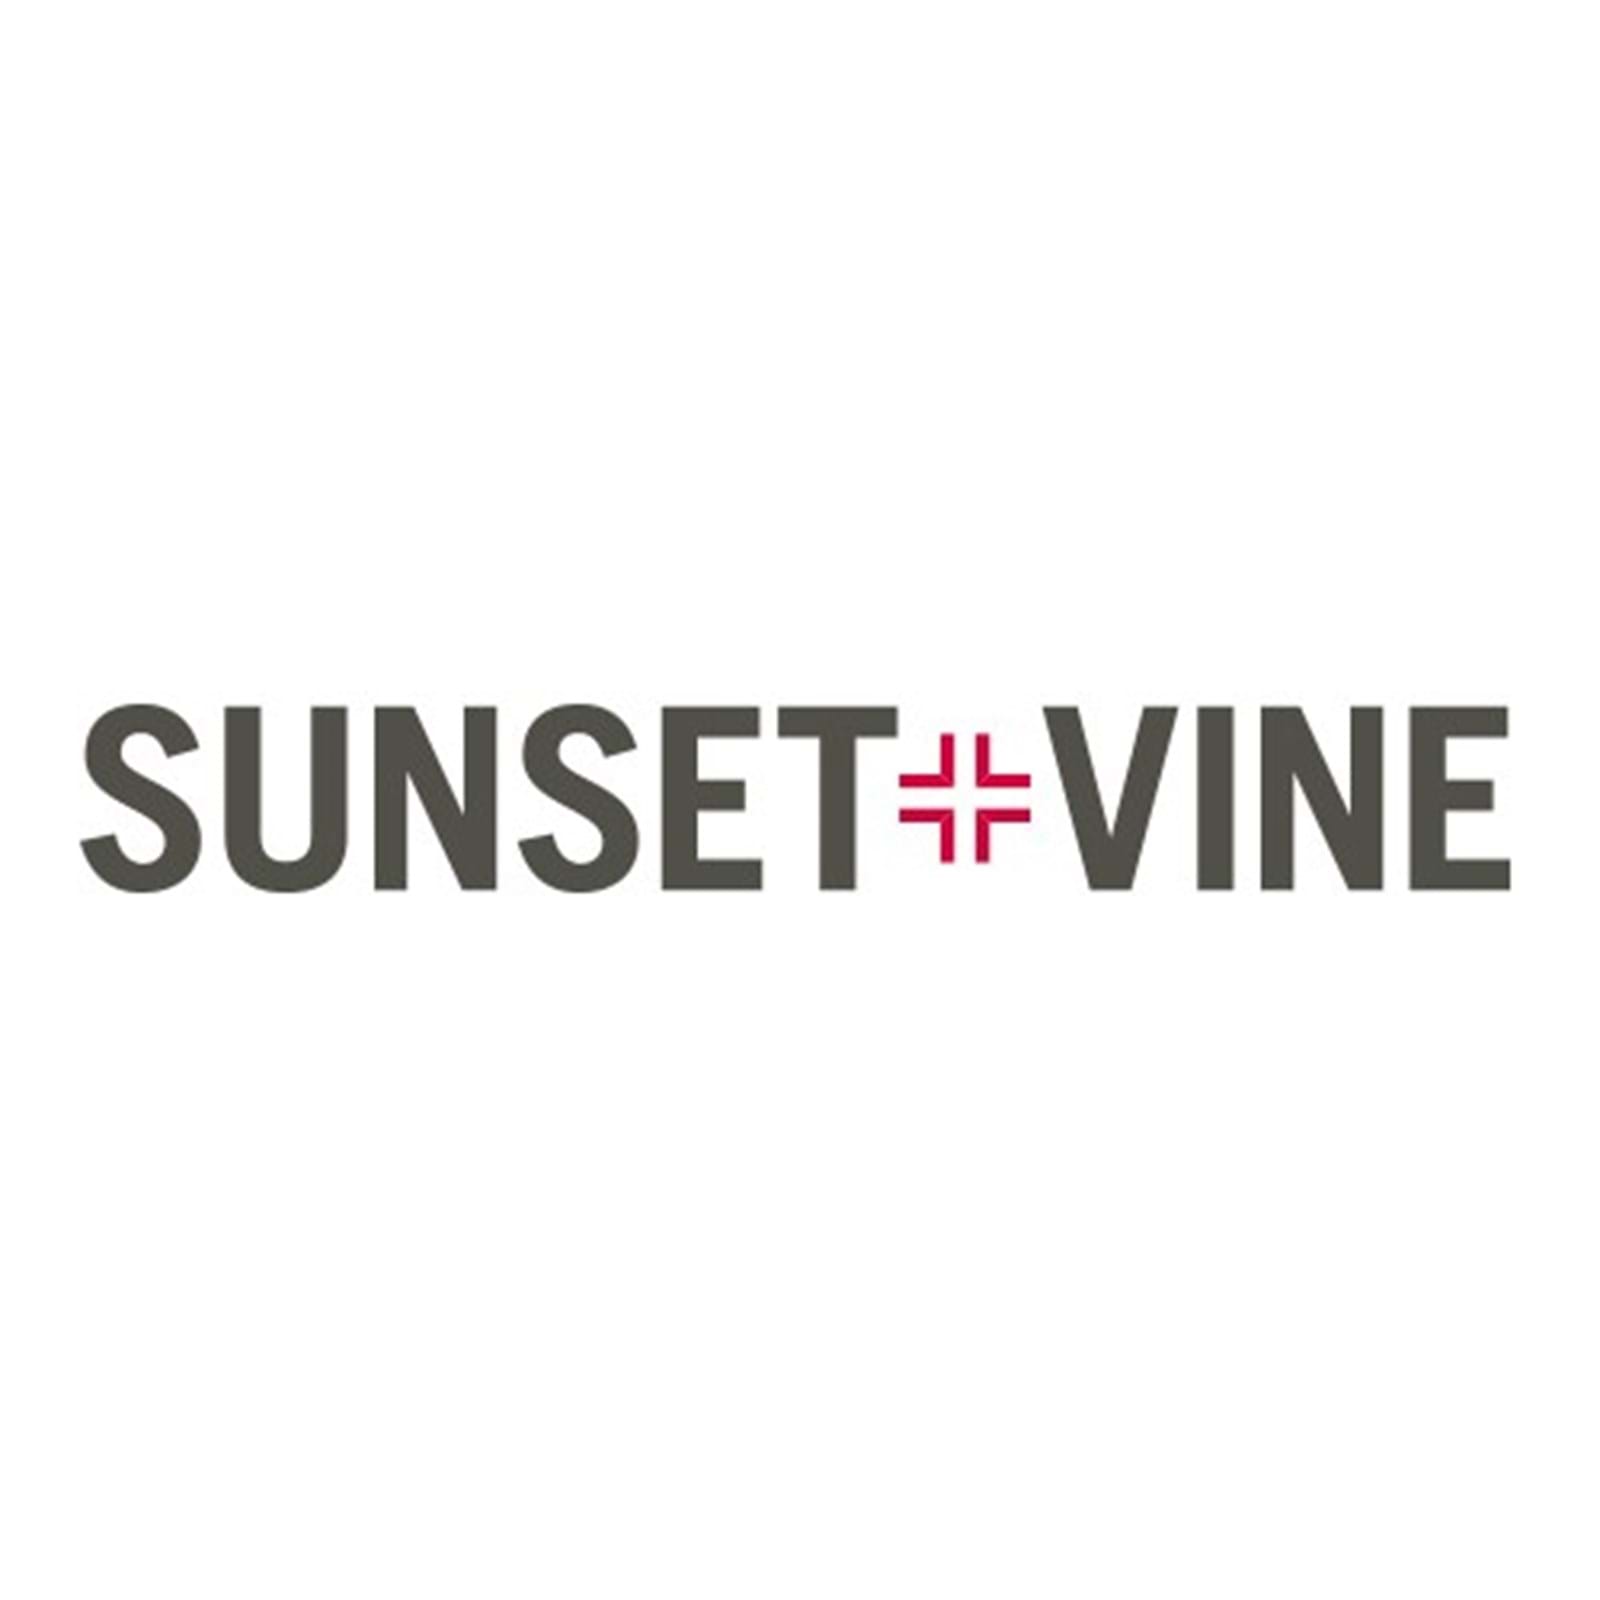 Sunset+Vine named the live production, content and media partnerships agency for The E-Bike Grand Prix